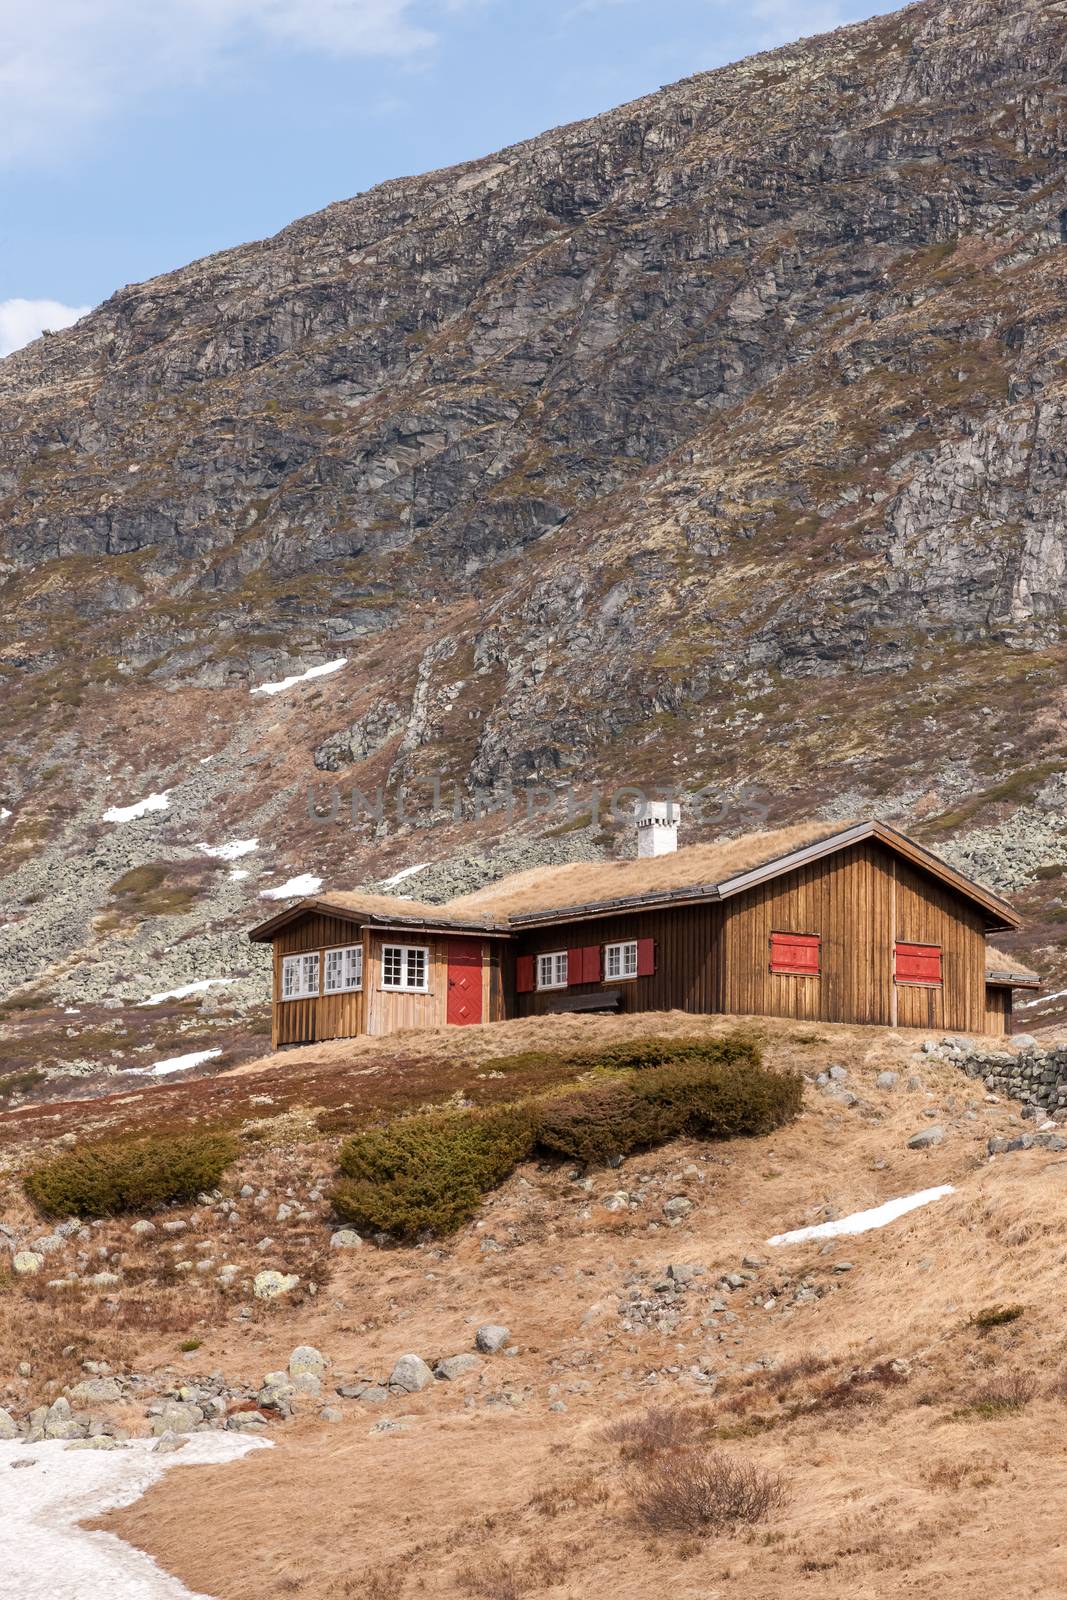 The Small Norwegian houses in Norway mountain.